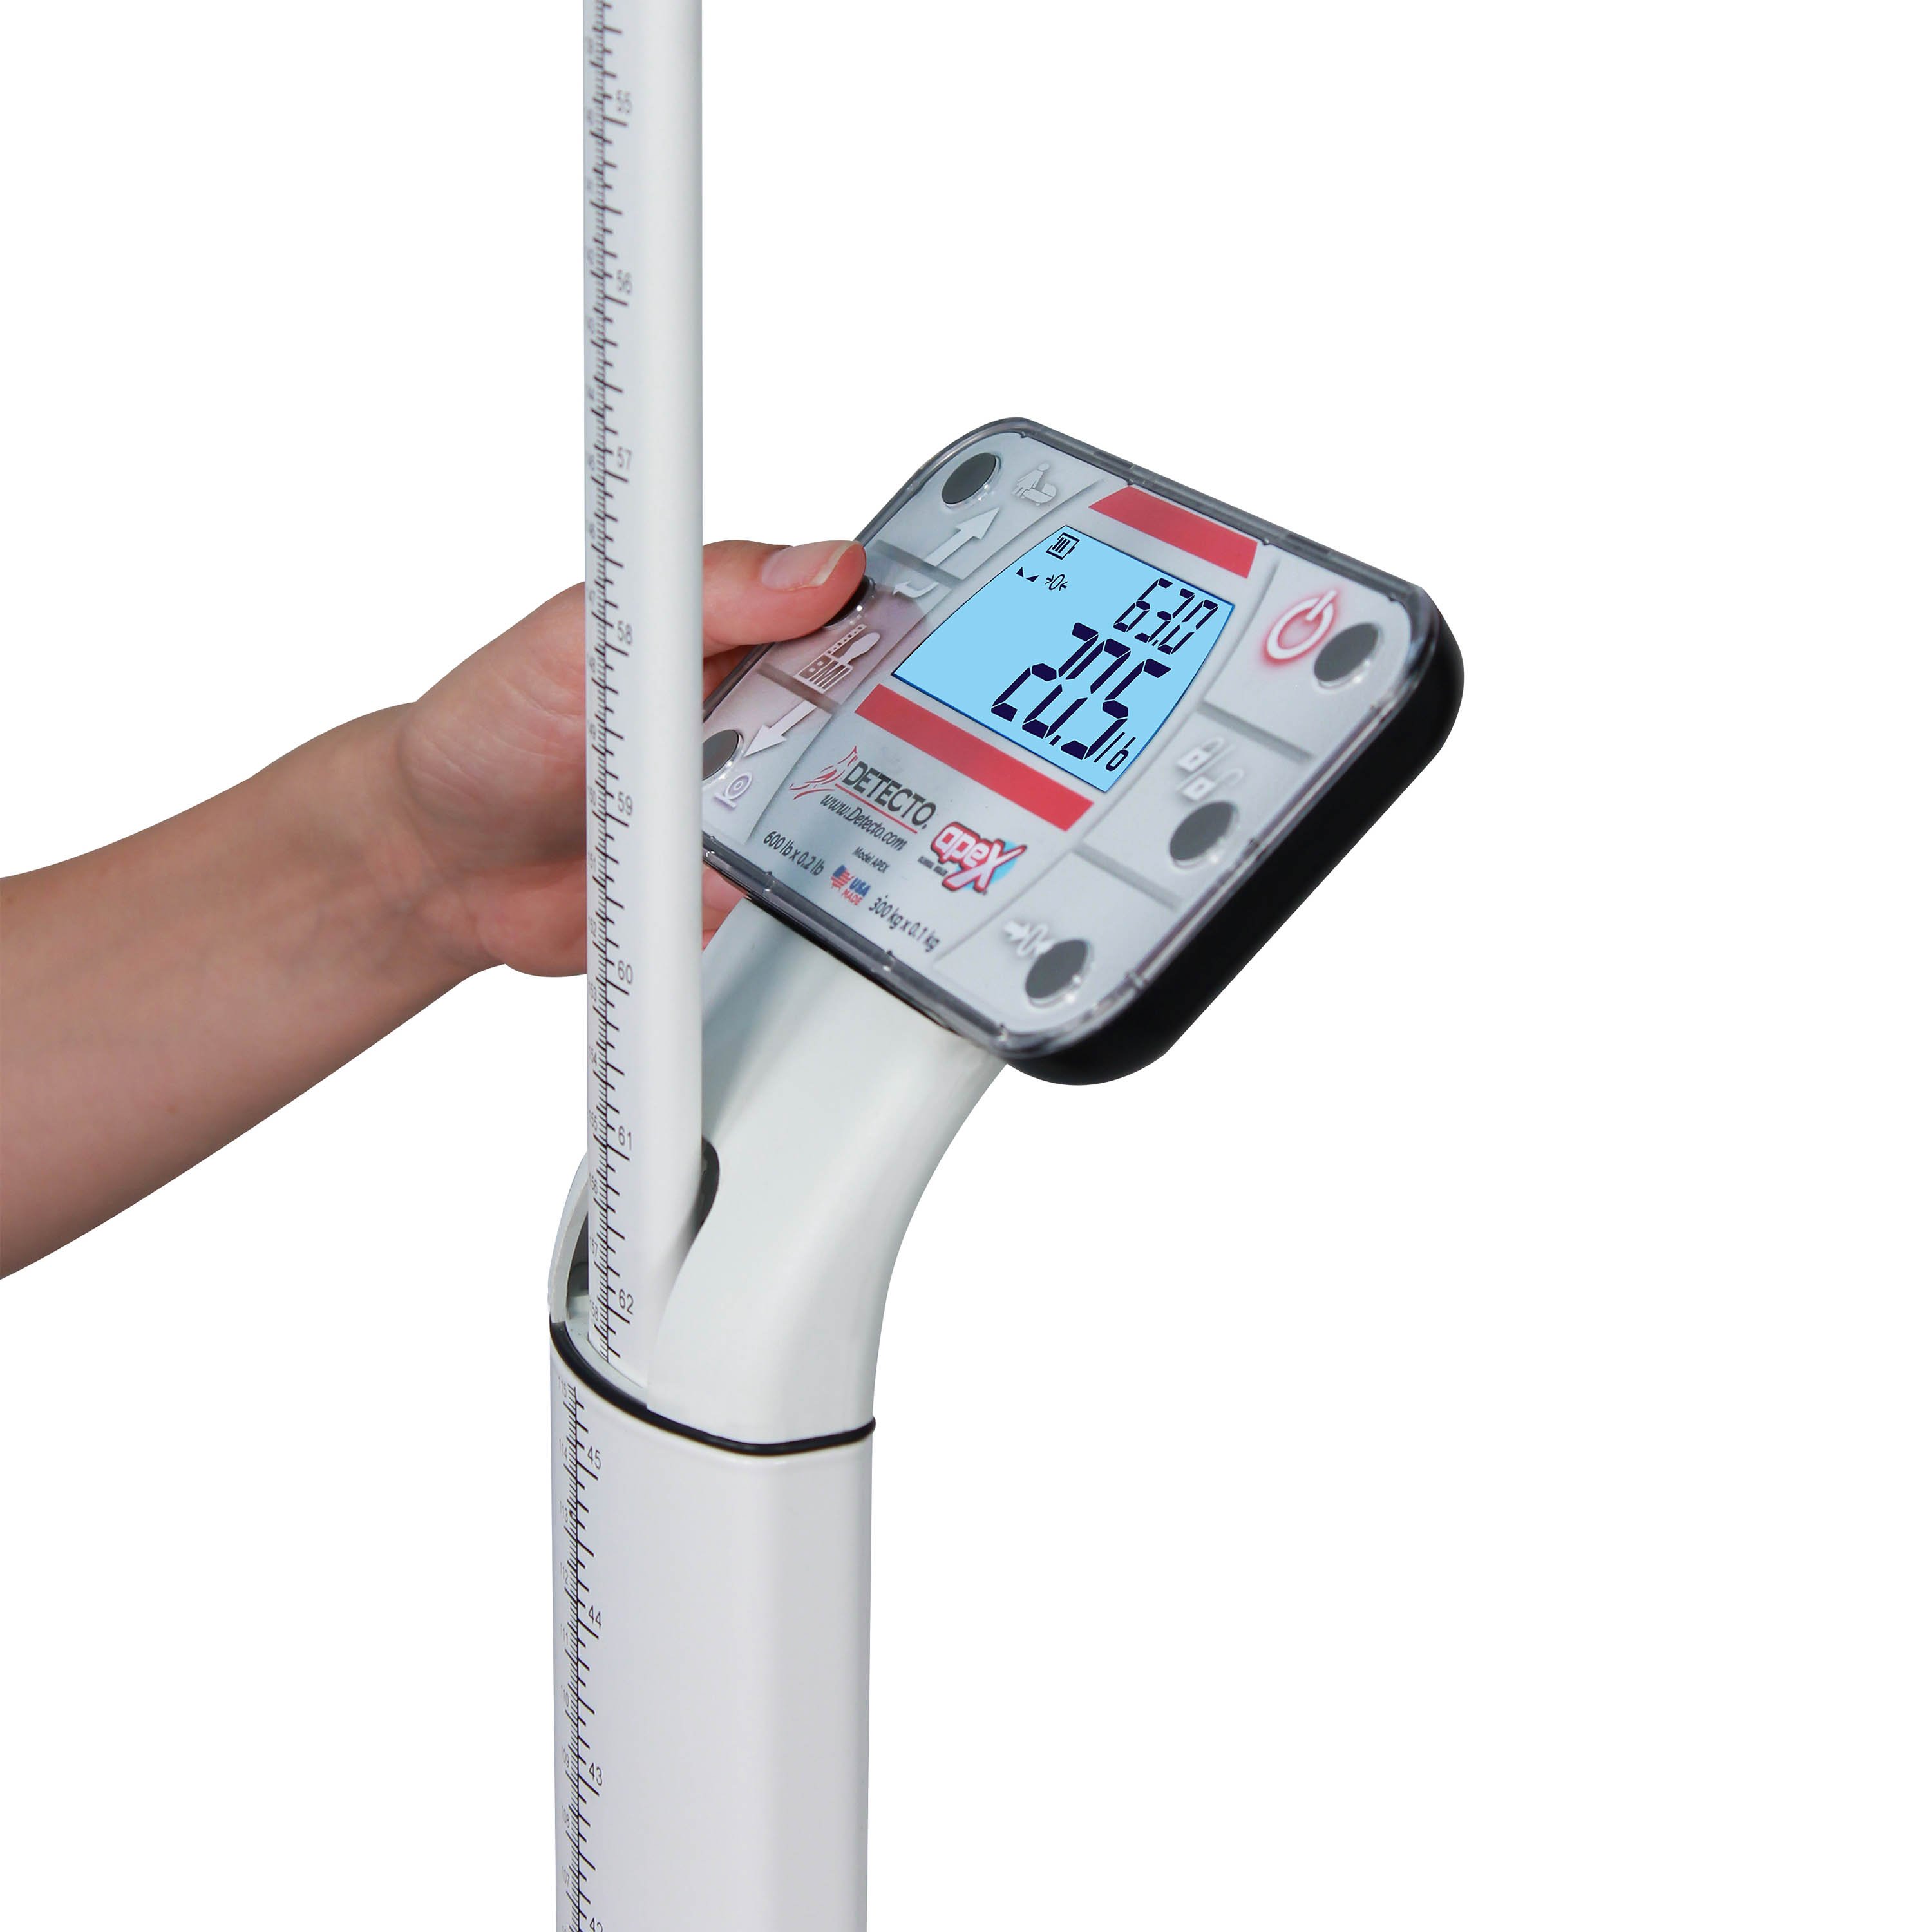 https://www.universalmedicalinc.com/media/catalog/product/cache/f176254afc5001a35a1c727280299a84/a/p/apex_apex-digital-clinical-scale-with-mechanical-height-rod-indicator-side-view.jpg